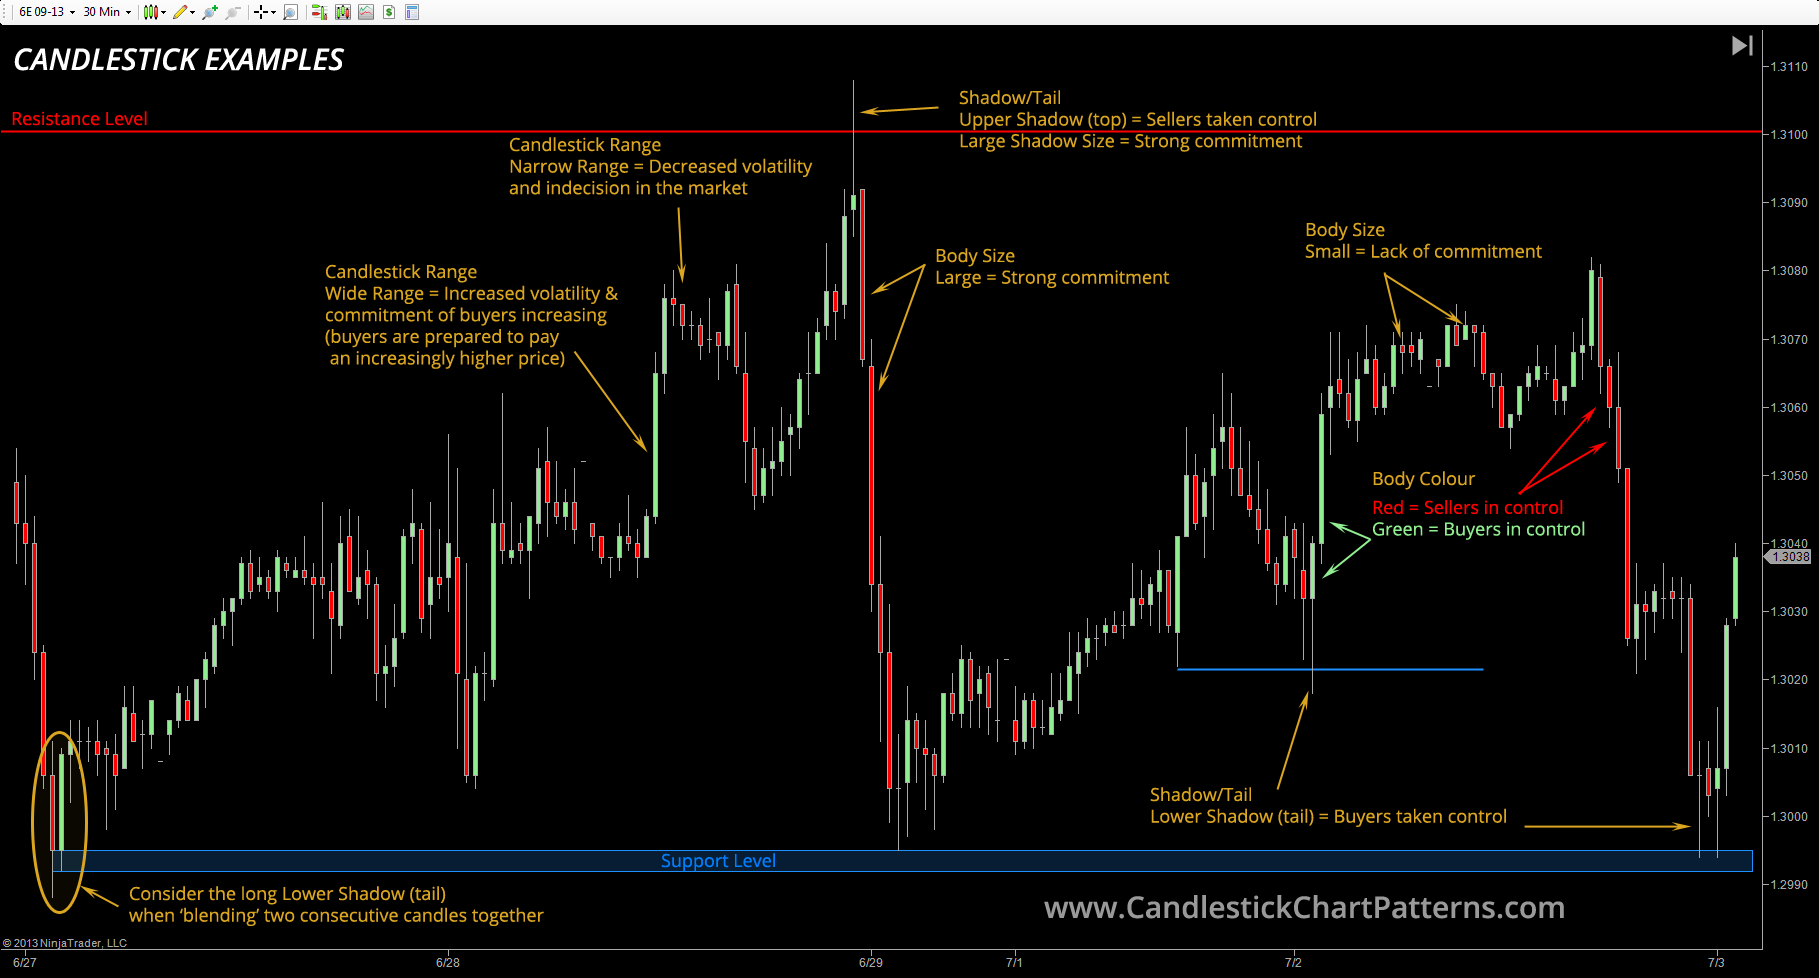 How To Trade Candlestick Chart Patterns